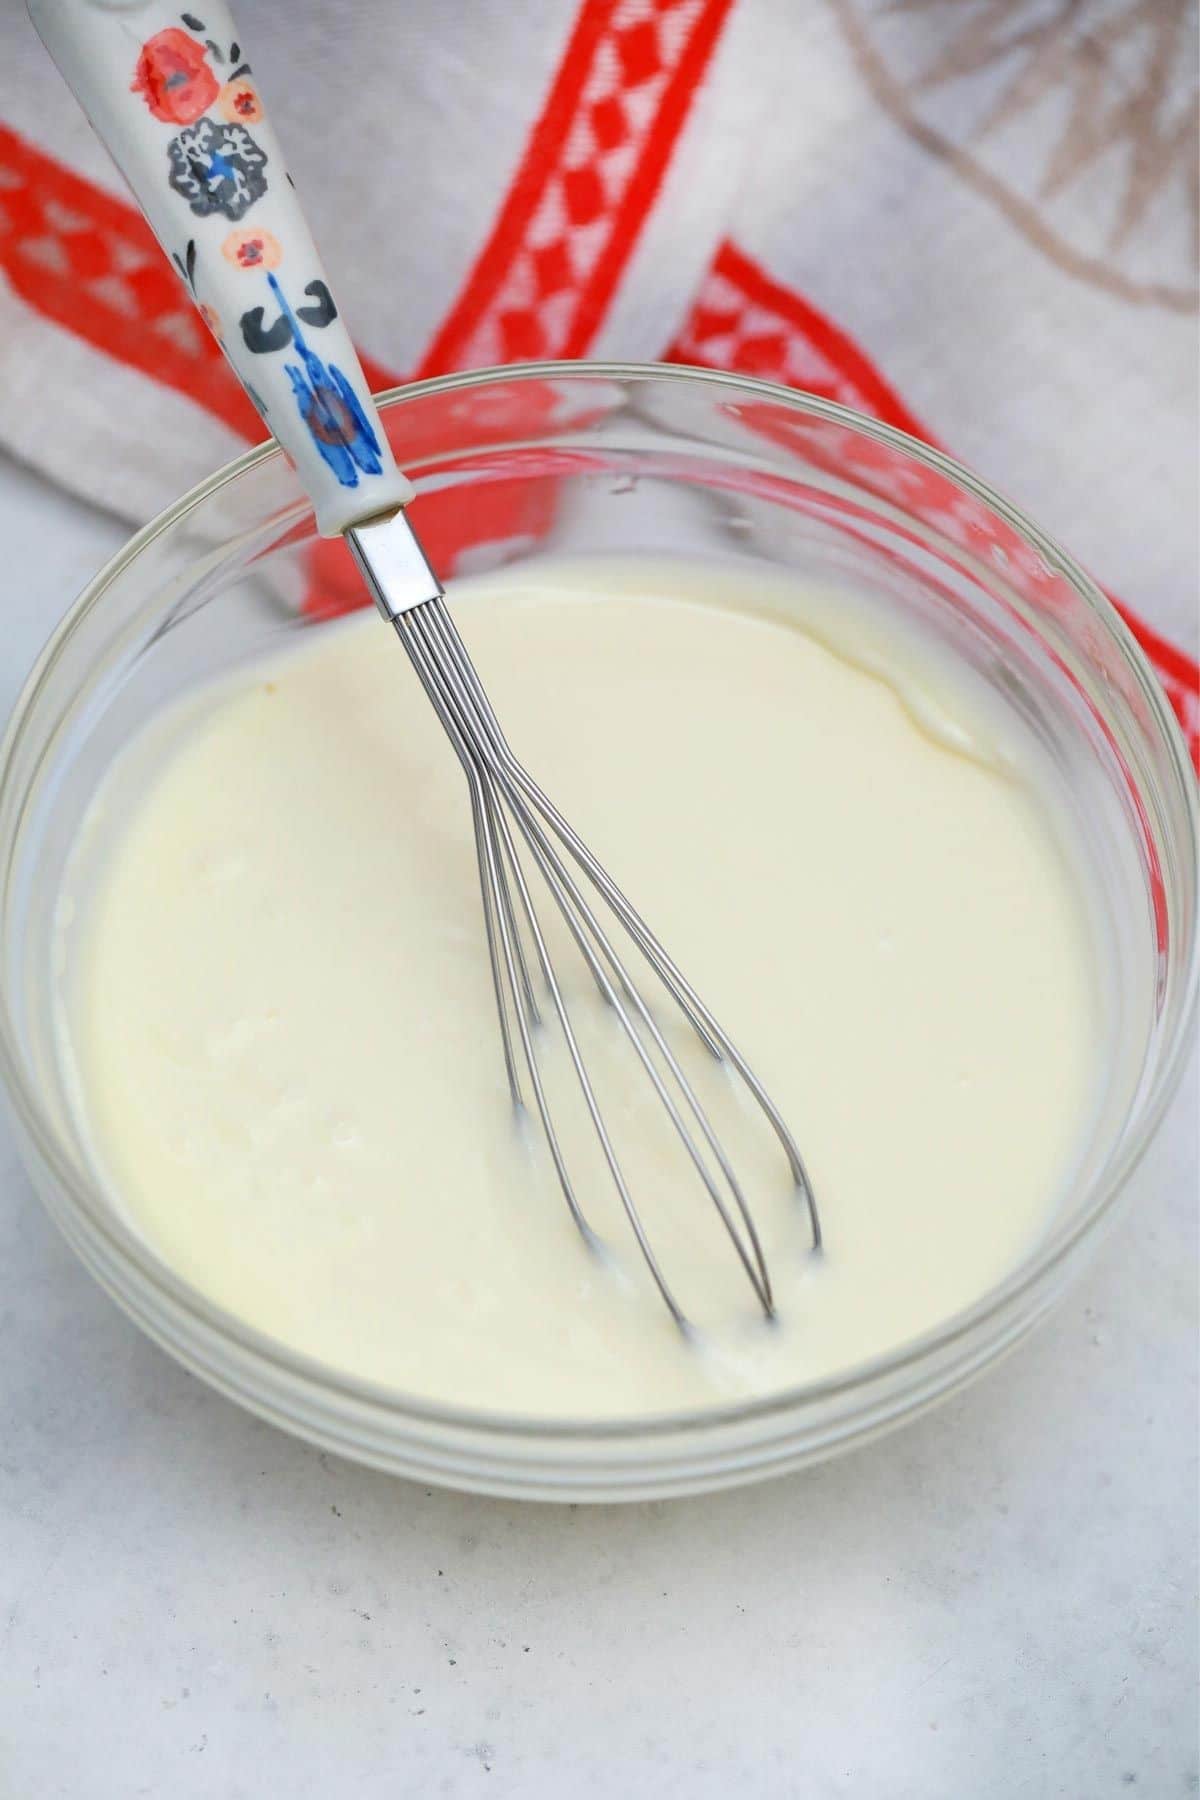 whisk in bowl of cream cheese frosting